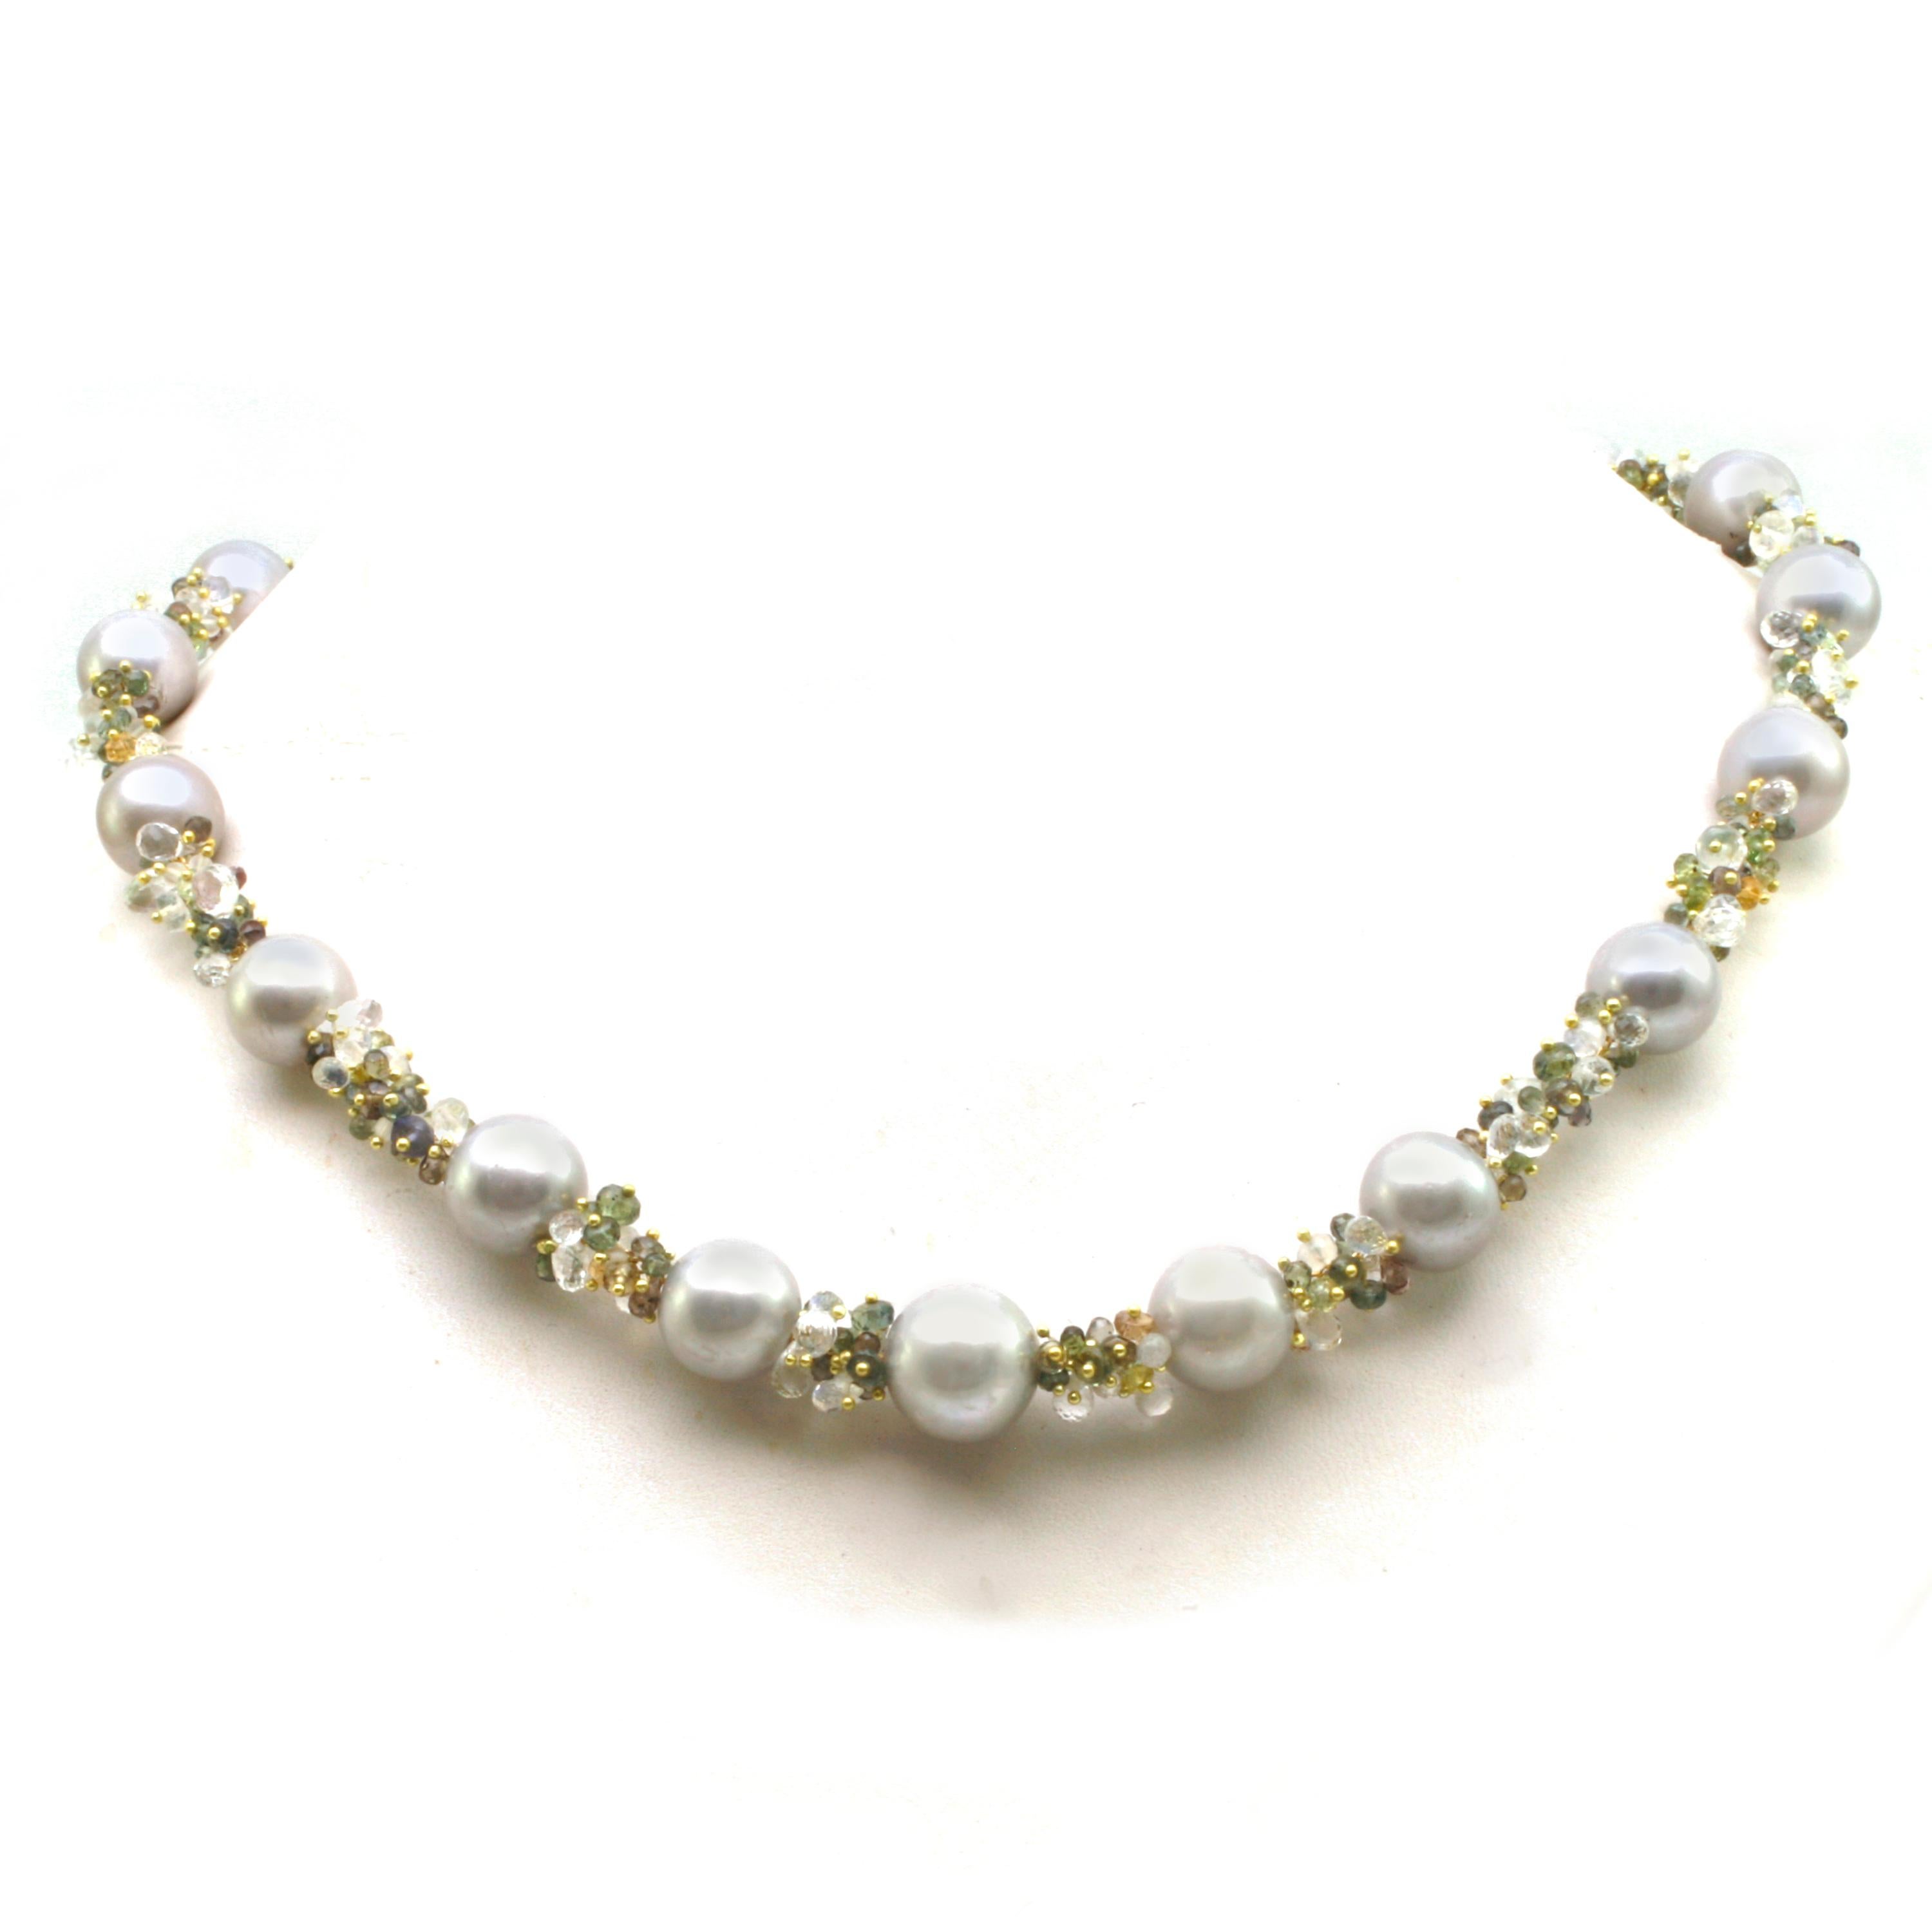 Women's or Men's Pearl Necklace with Grey Pearls, Faceted Gemstone Beads in 18k Diana Kim England For Sale